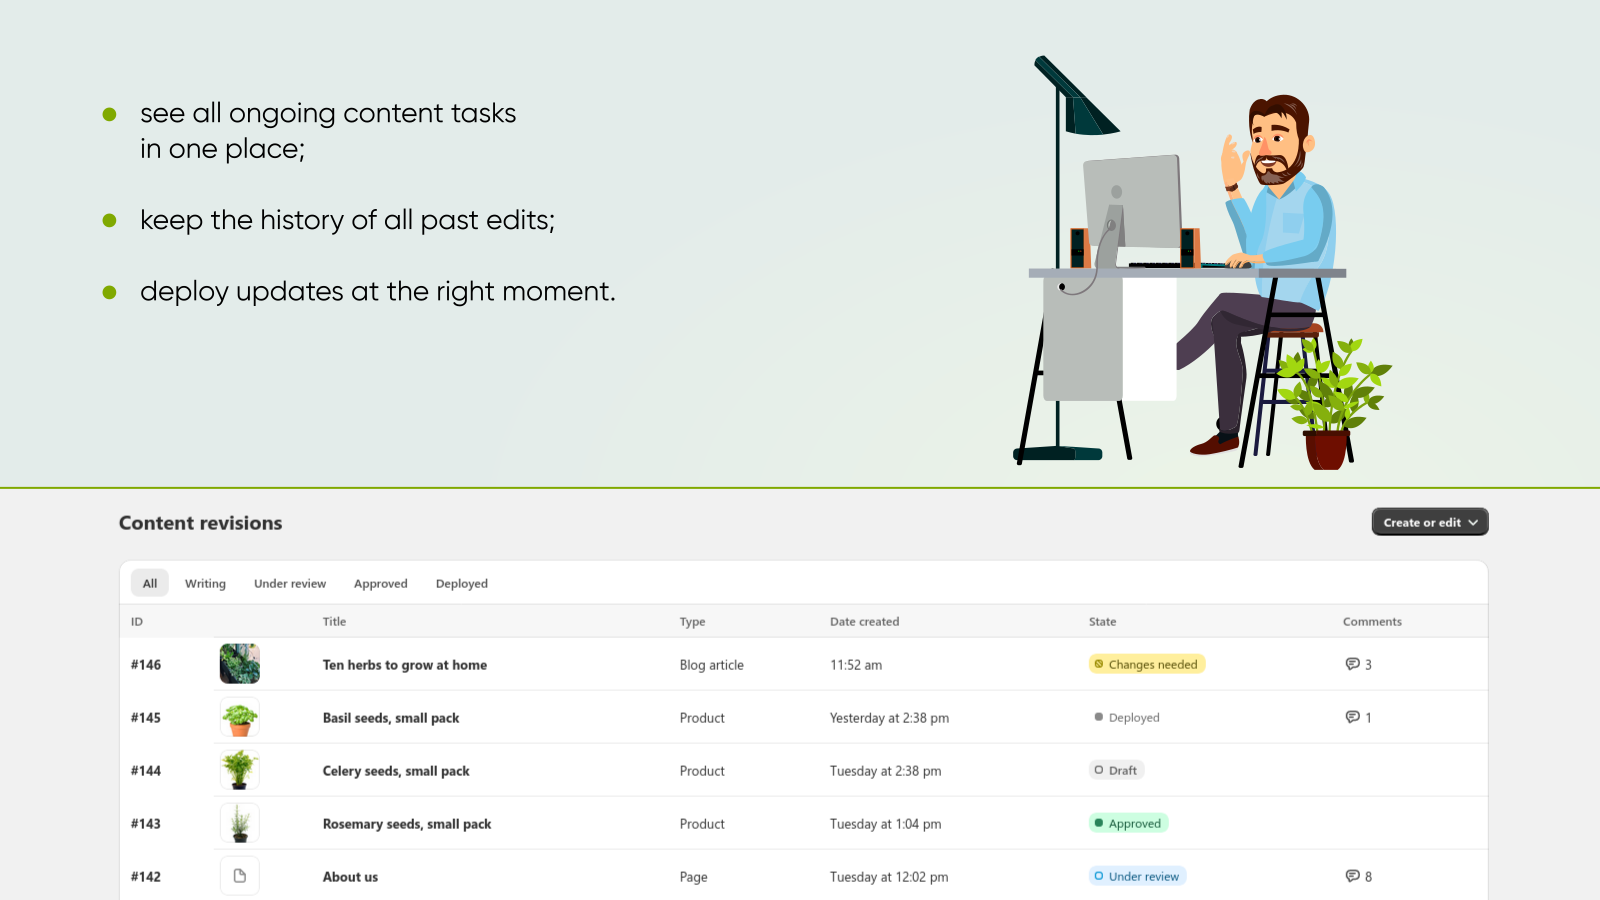 see all ongoing content tasks in one place